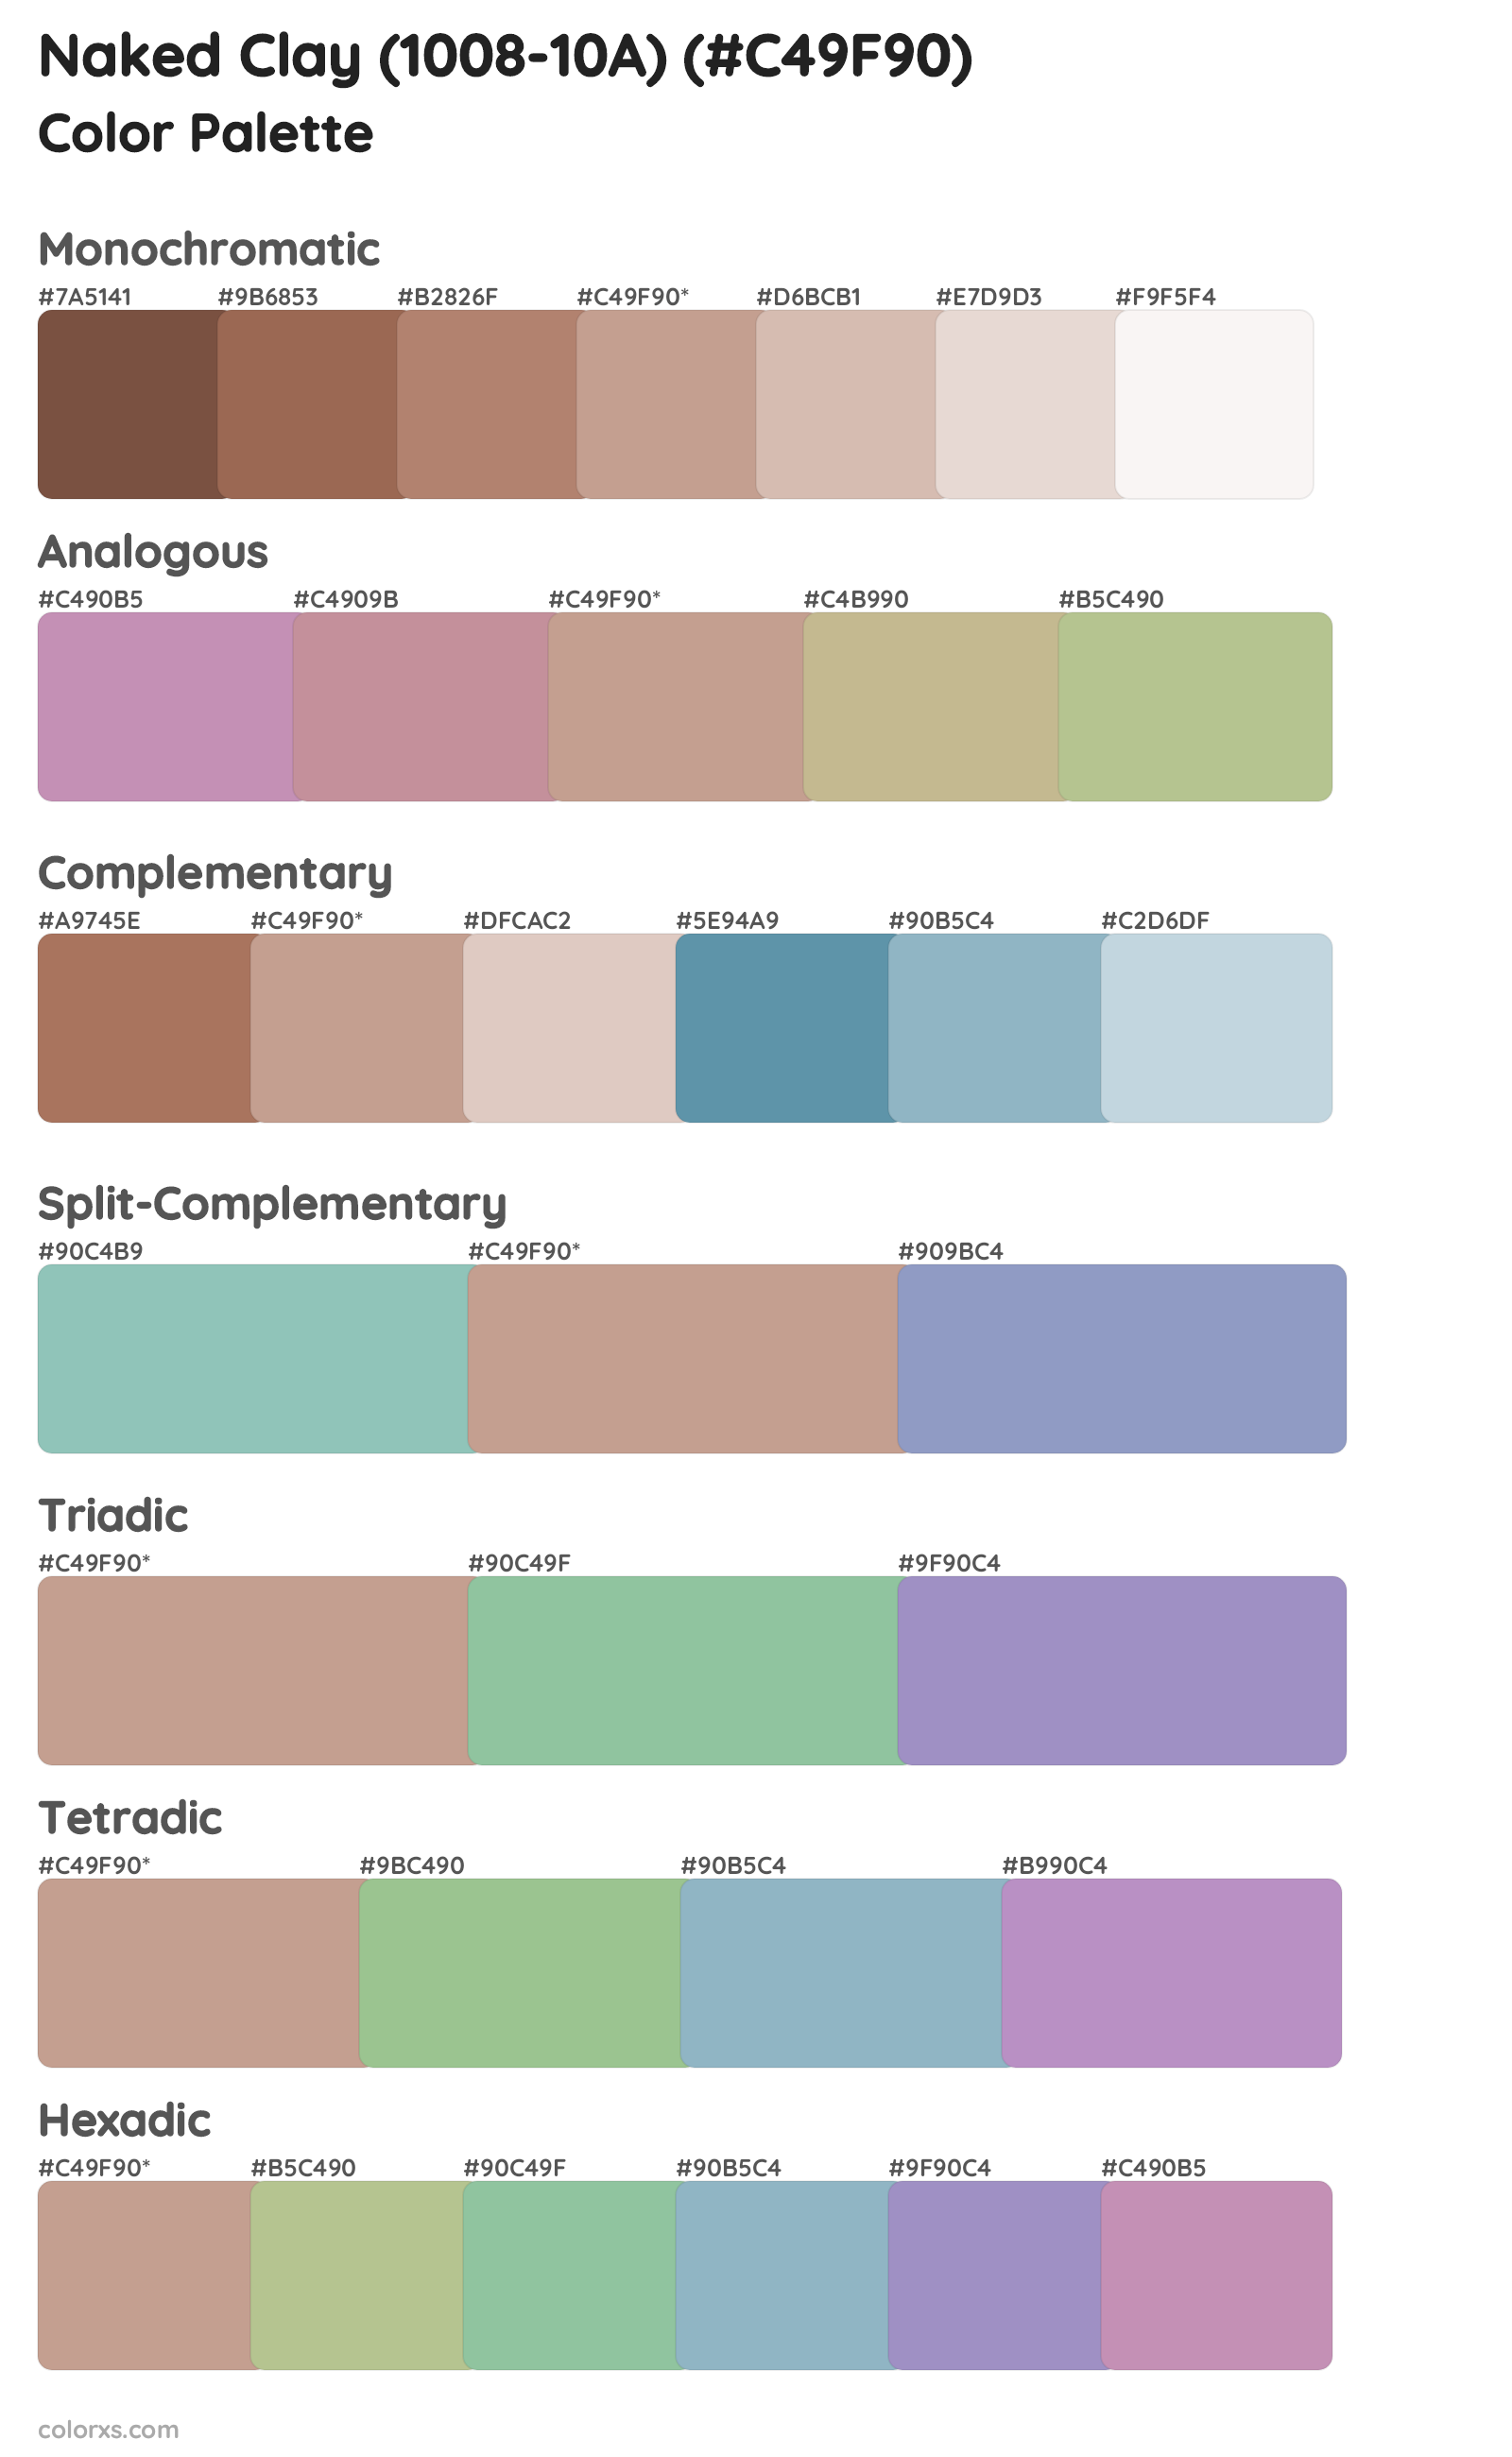 Naked Clay (1008-10A) Color Scheme Palettes